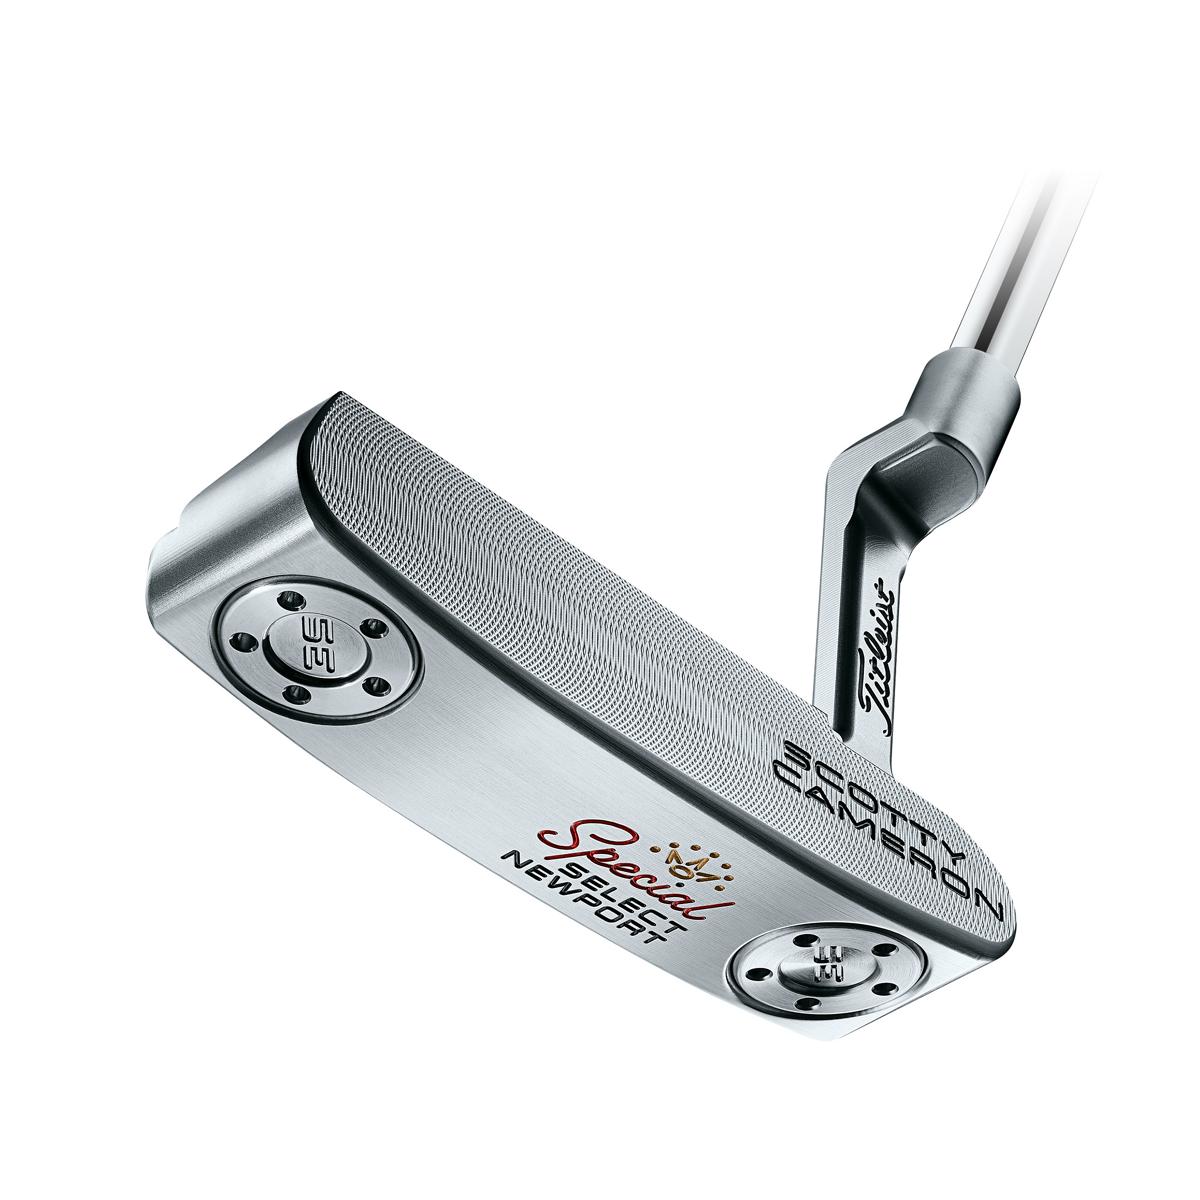 Ready go to ... https://www.titleist.co.uk/golf-clubs/putters/special-select [ Scotty Cameron Select Putters | Titleist]